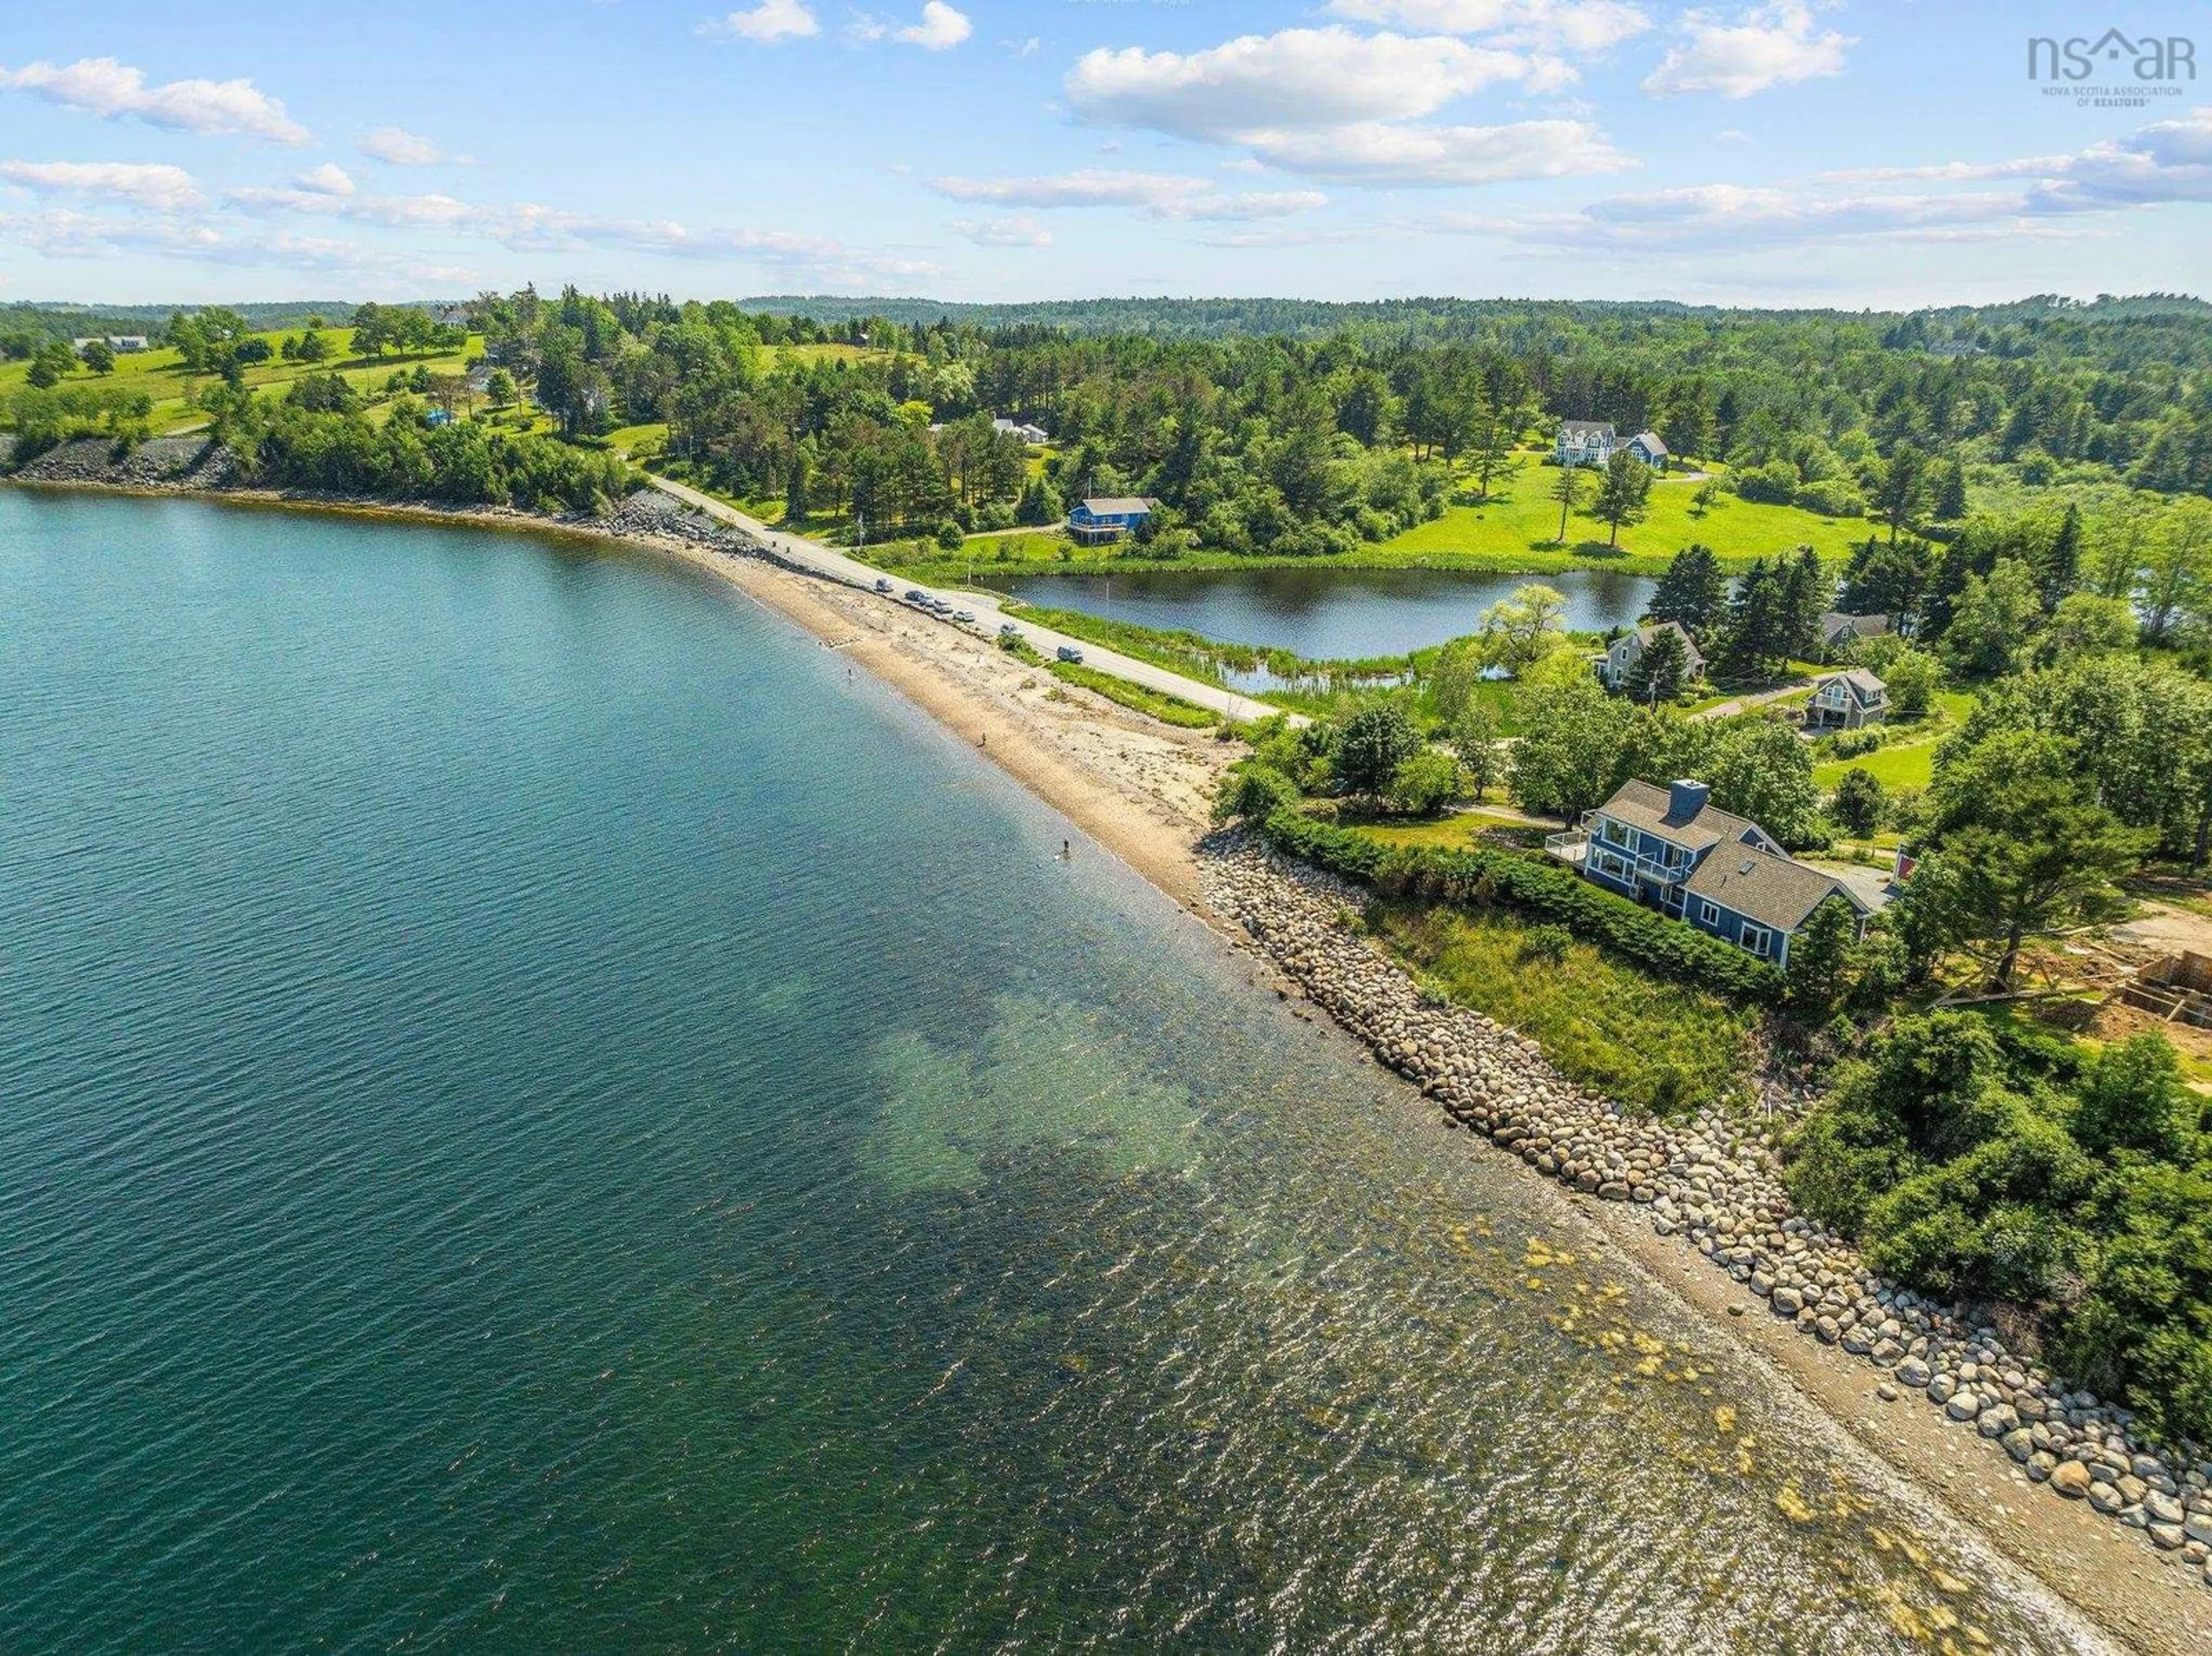 Lakeview for 219 Maders Cove Rd, Maders Cove Nova Scotia B0J 2E0